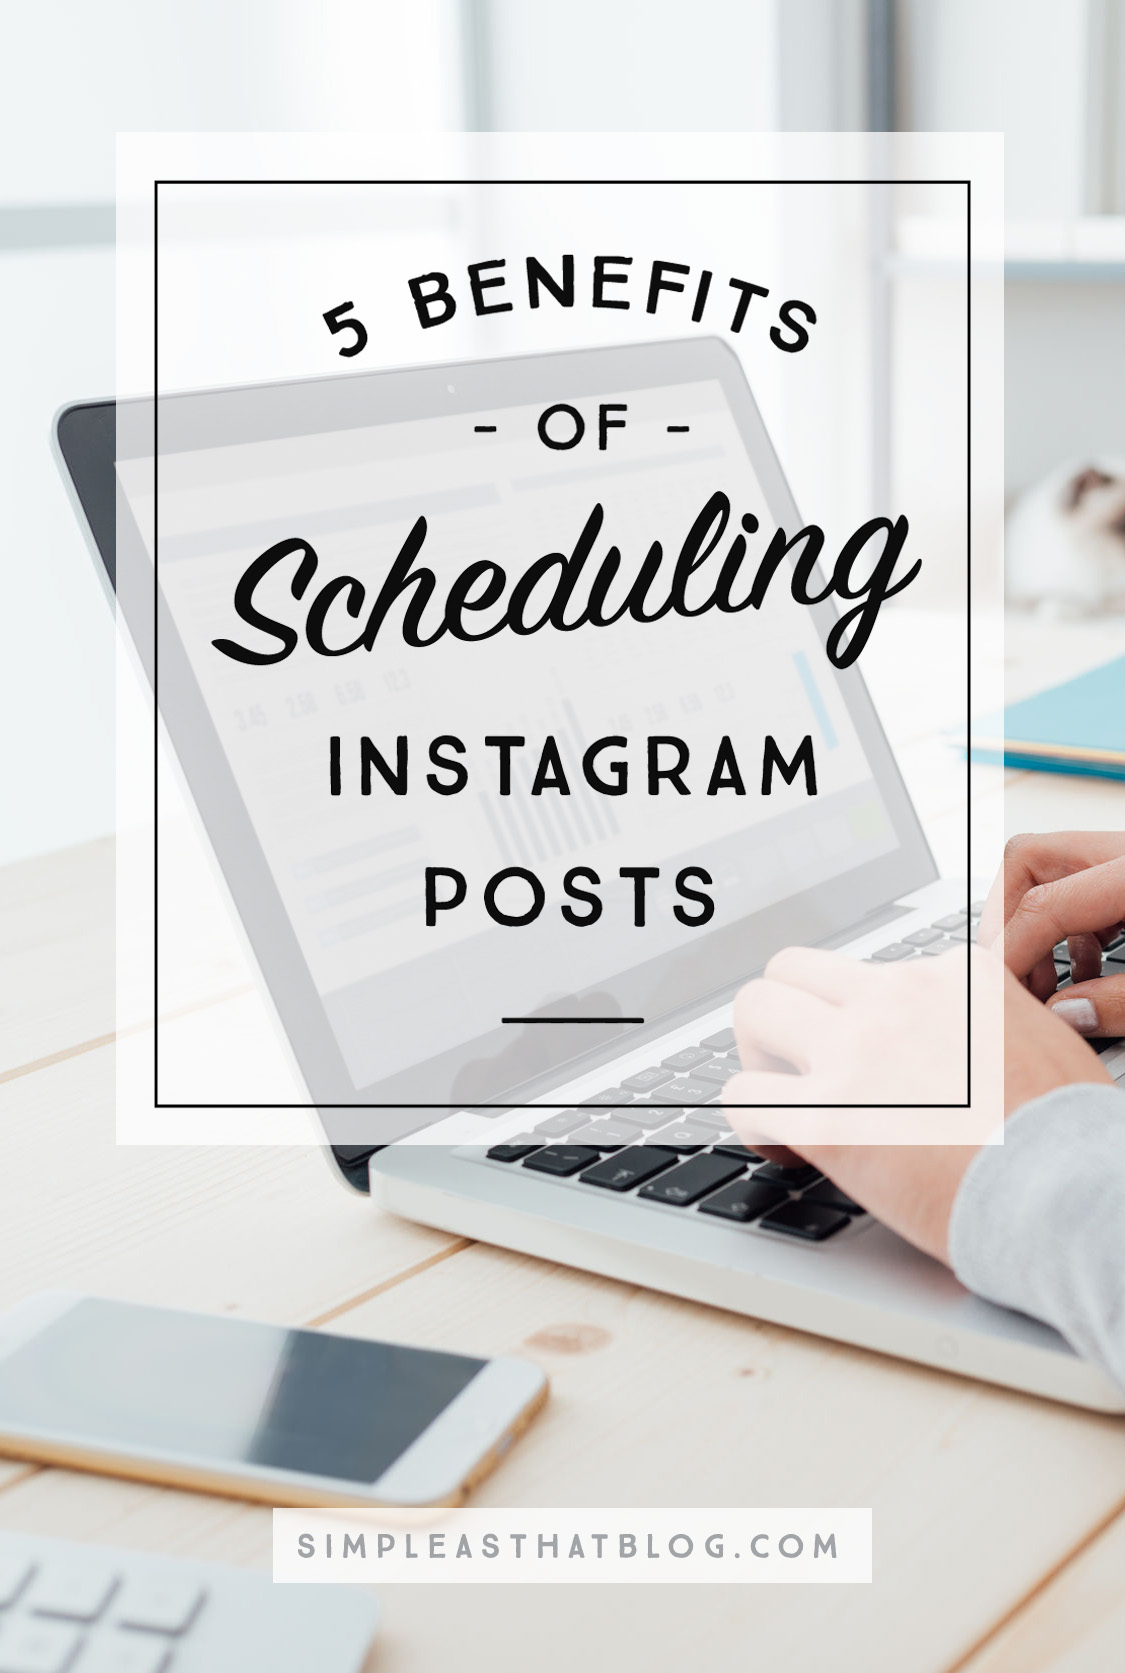 5 Benefits of Scheduling Instagram Posts – As a busy wife, mom and blogger, finding ways to stream-line my daily tasks is a must. In life and in business I need to be efficient with my time and scheduling my Instagram posts has been one small thing that helps me do that.